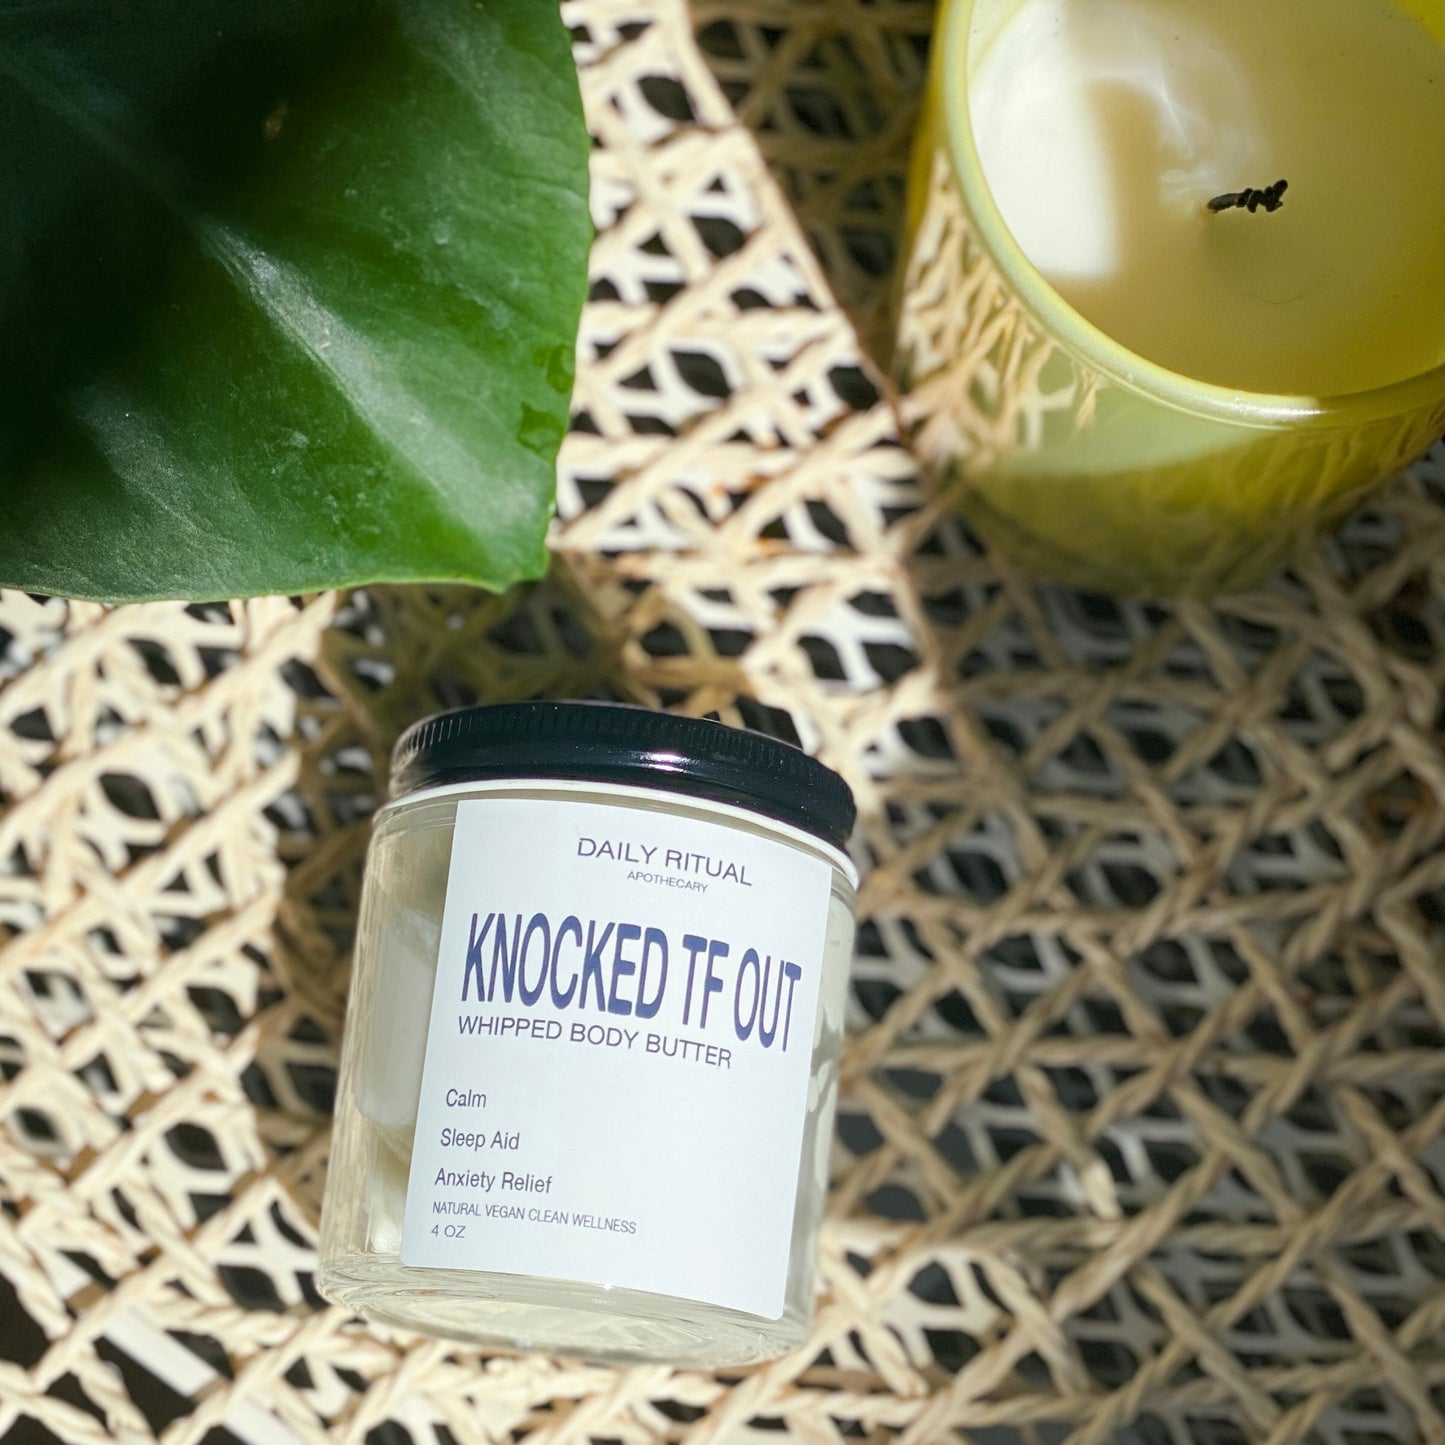 Knocked TF Out Whipped Body Butter - Daily Ritual Apothecary